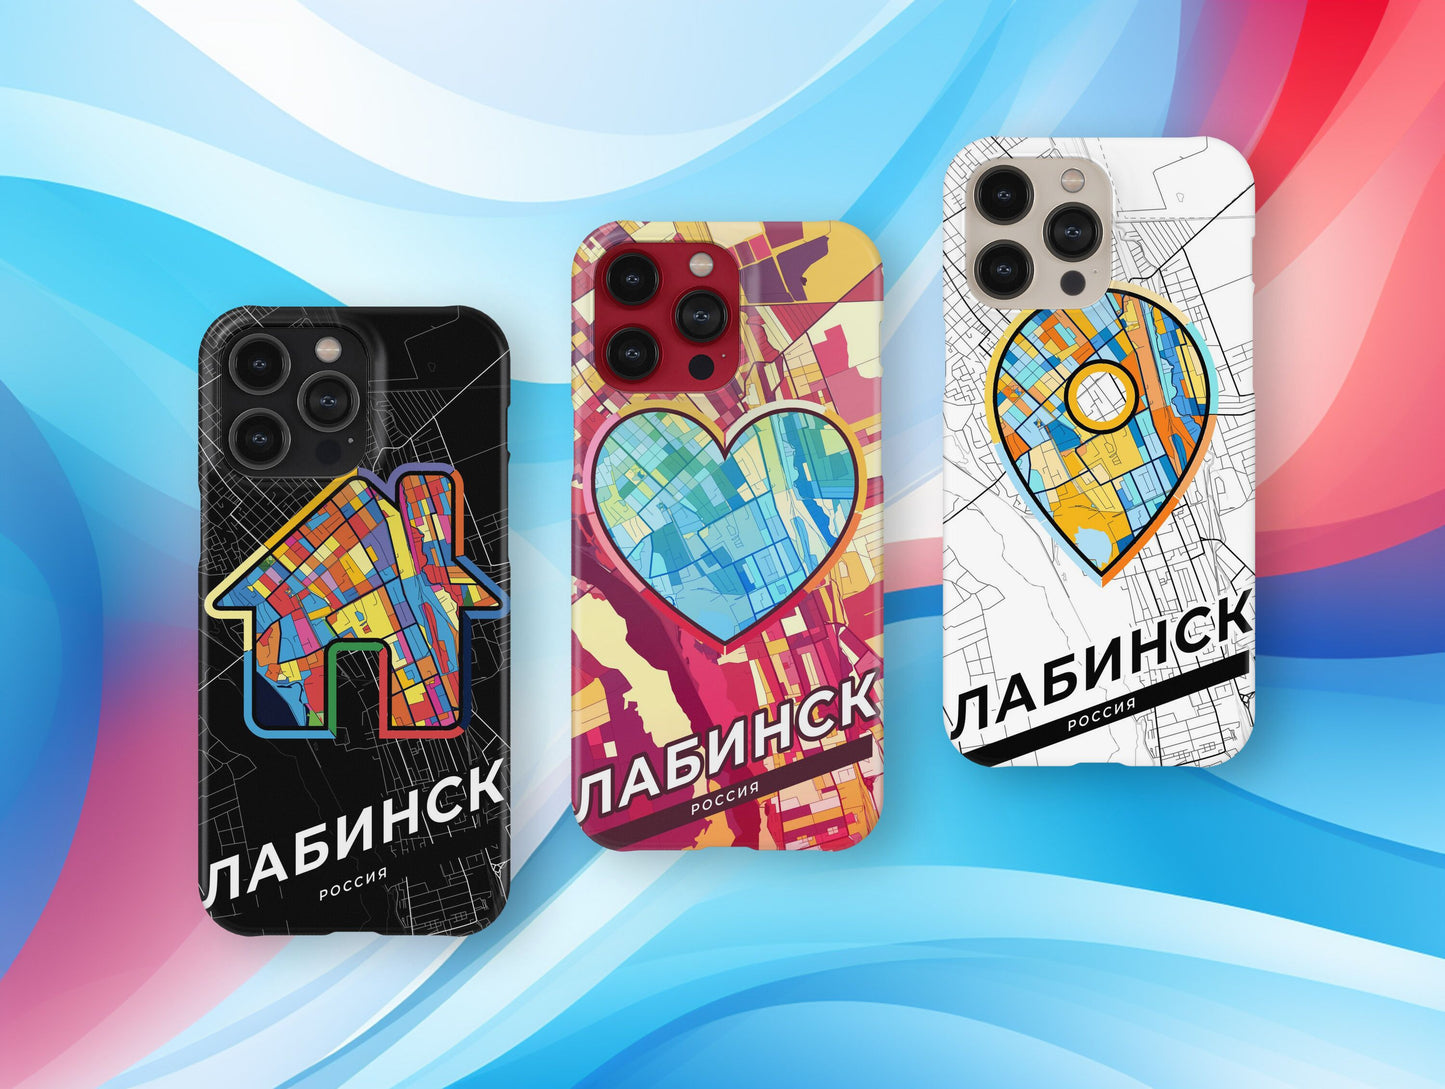 Labinsk Russia slim phone case with colorful icon. Birthday, wedding or housewarming gift. Couple match cases.